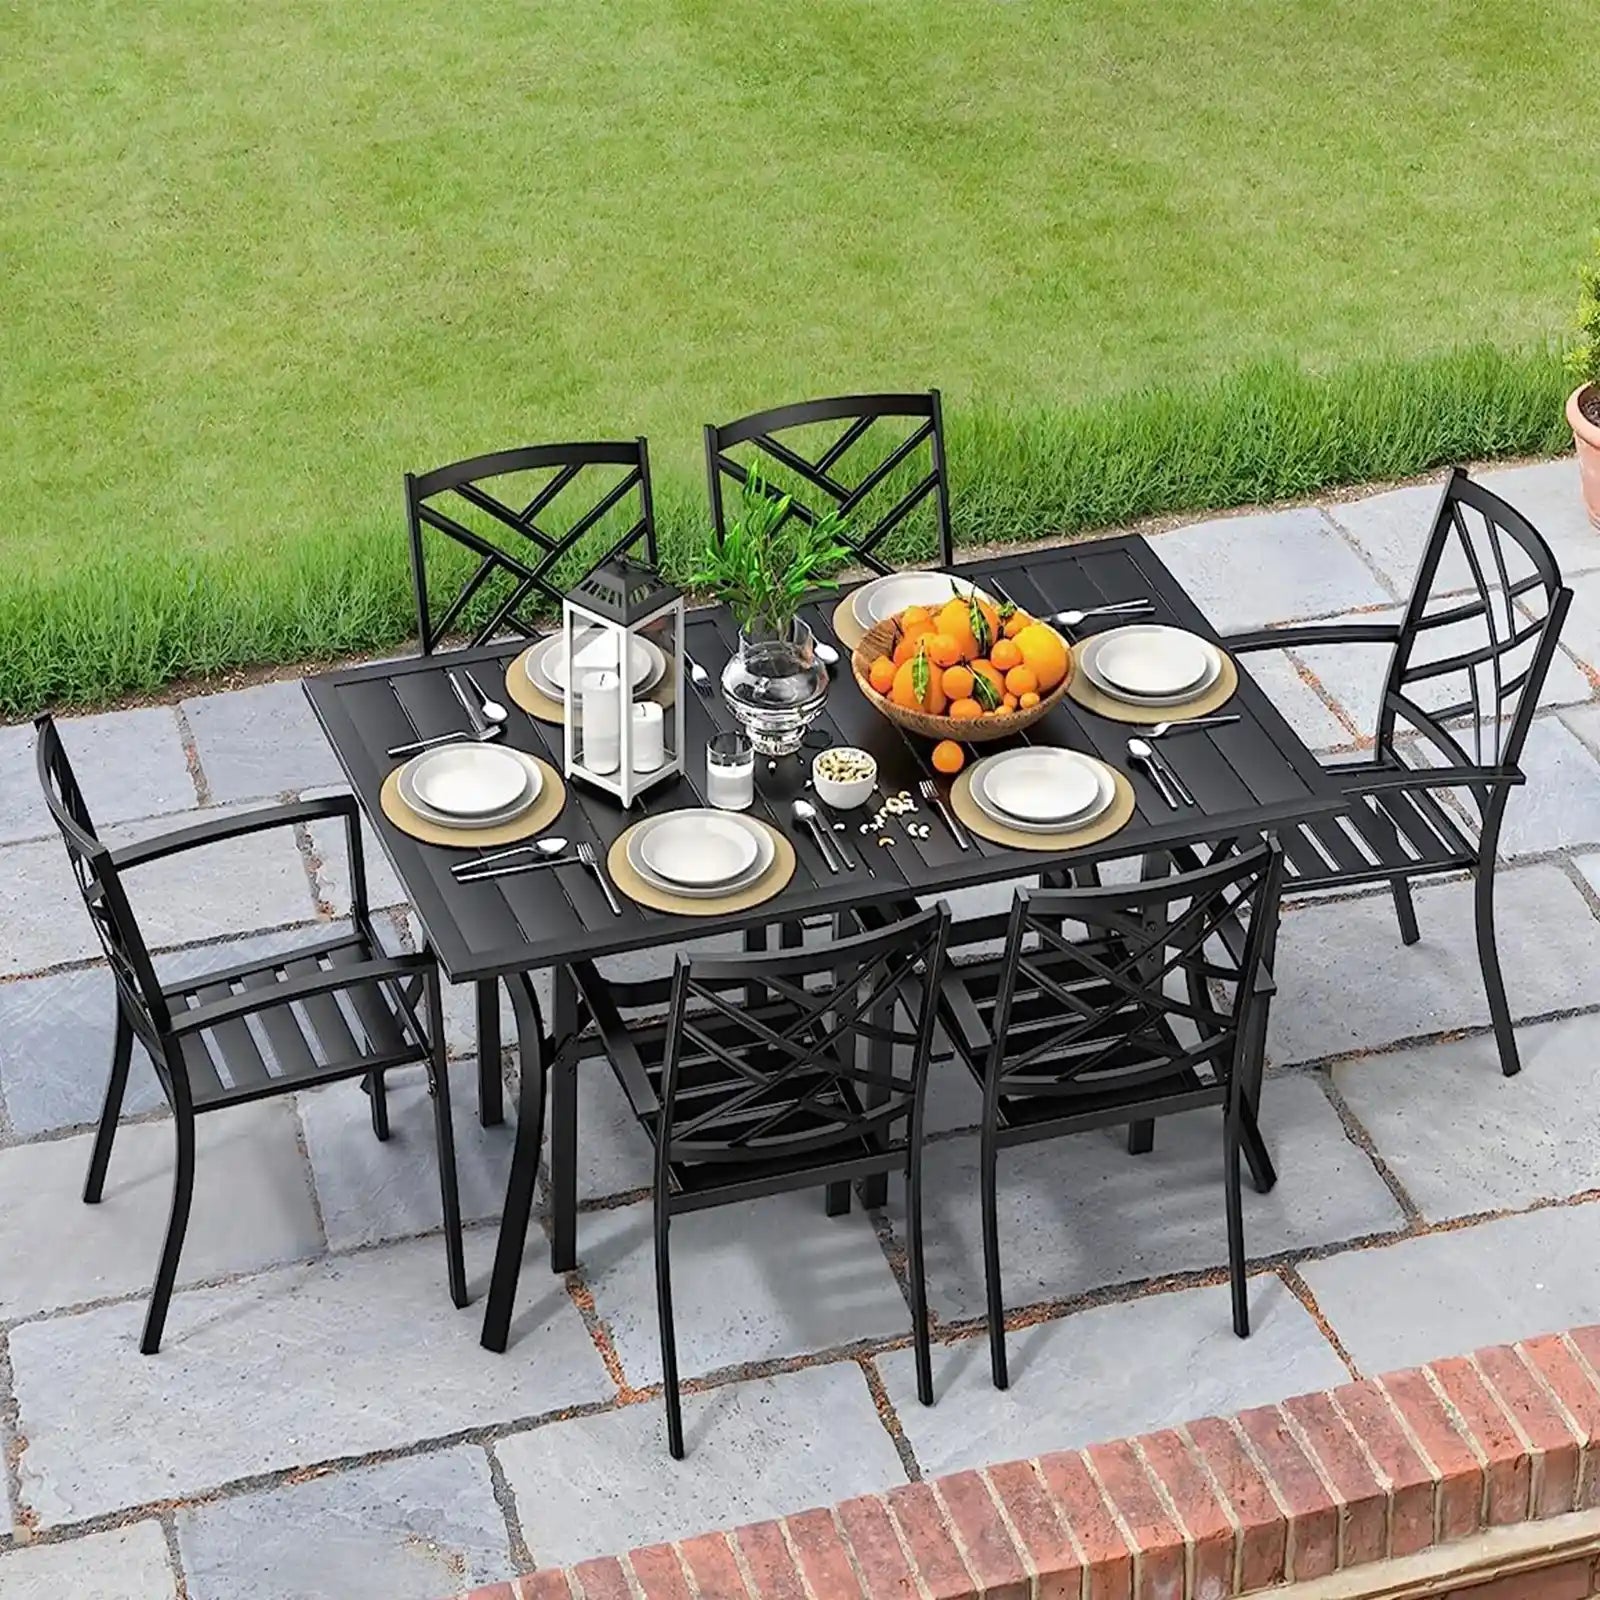 Outdoor Table 63" Patio Metal Steel Classic Rectangle Black Dining Table